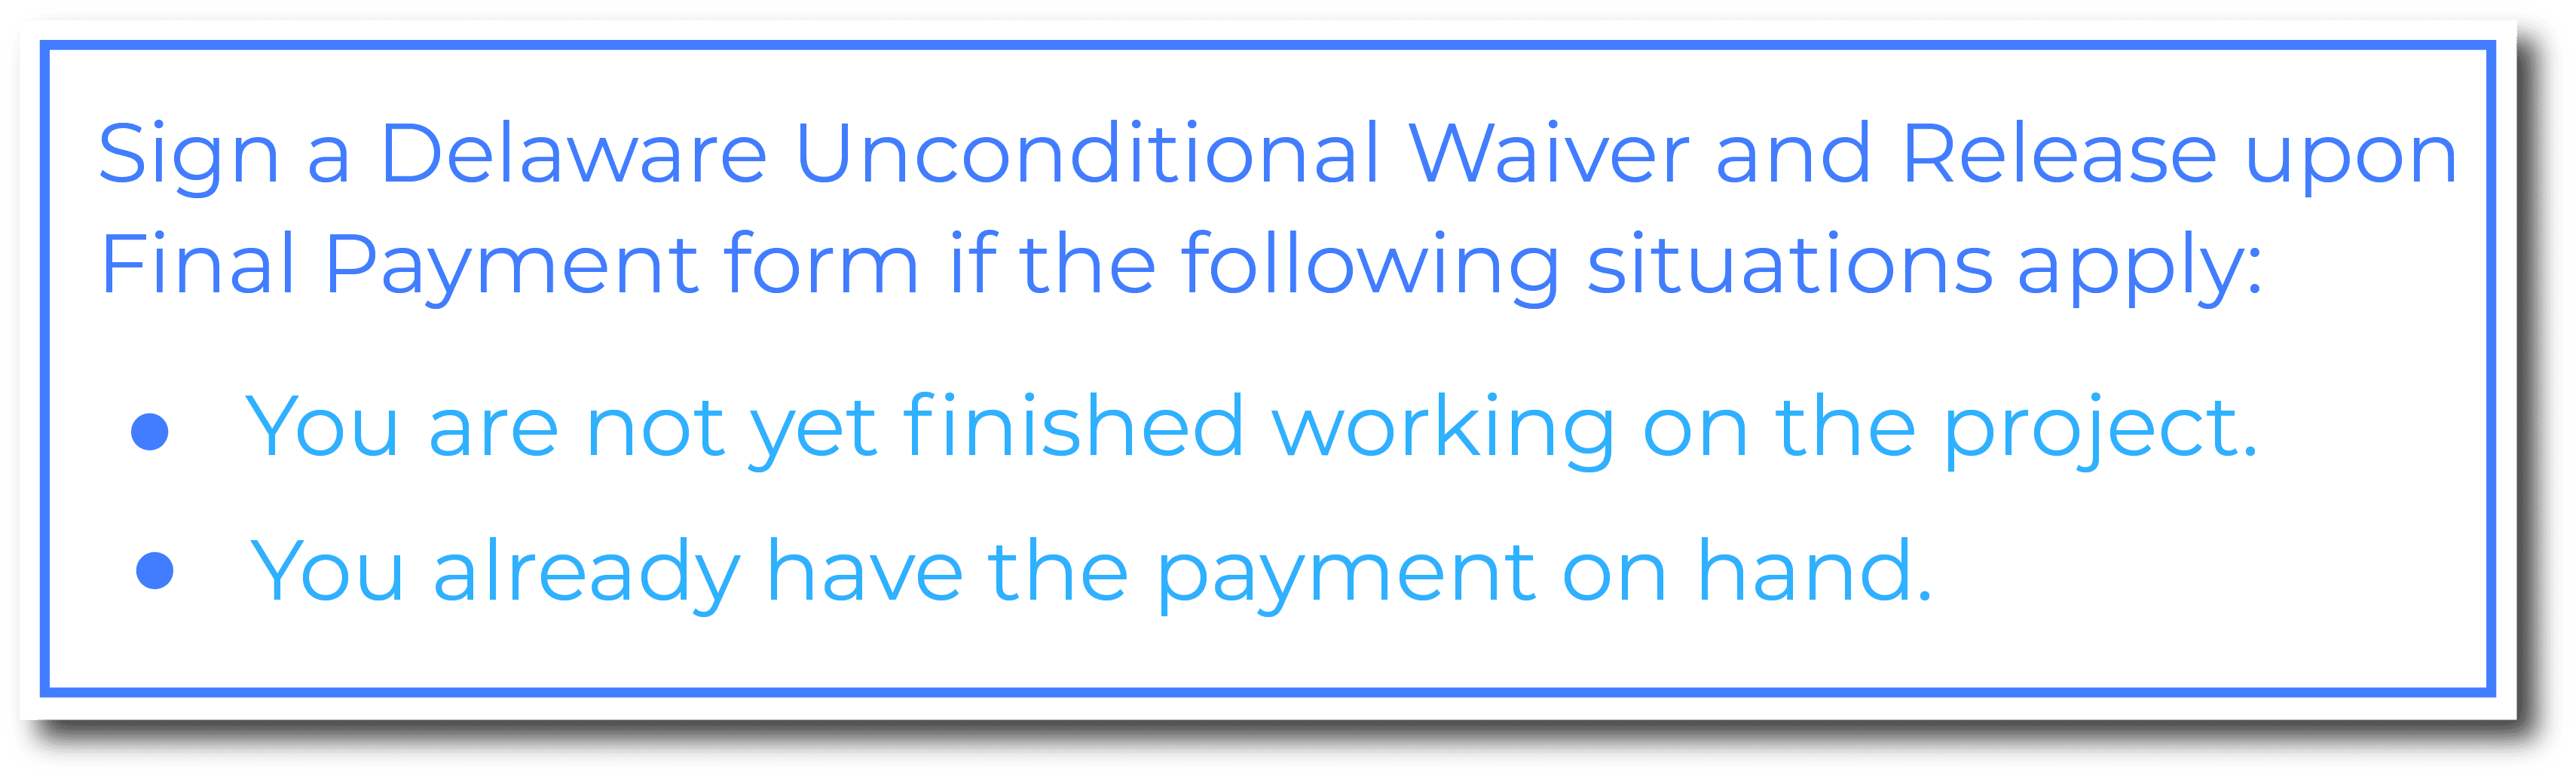 Delaware Unconditional Waiver and Release upon Progress Payment